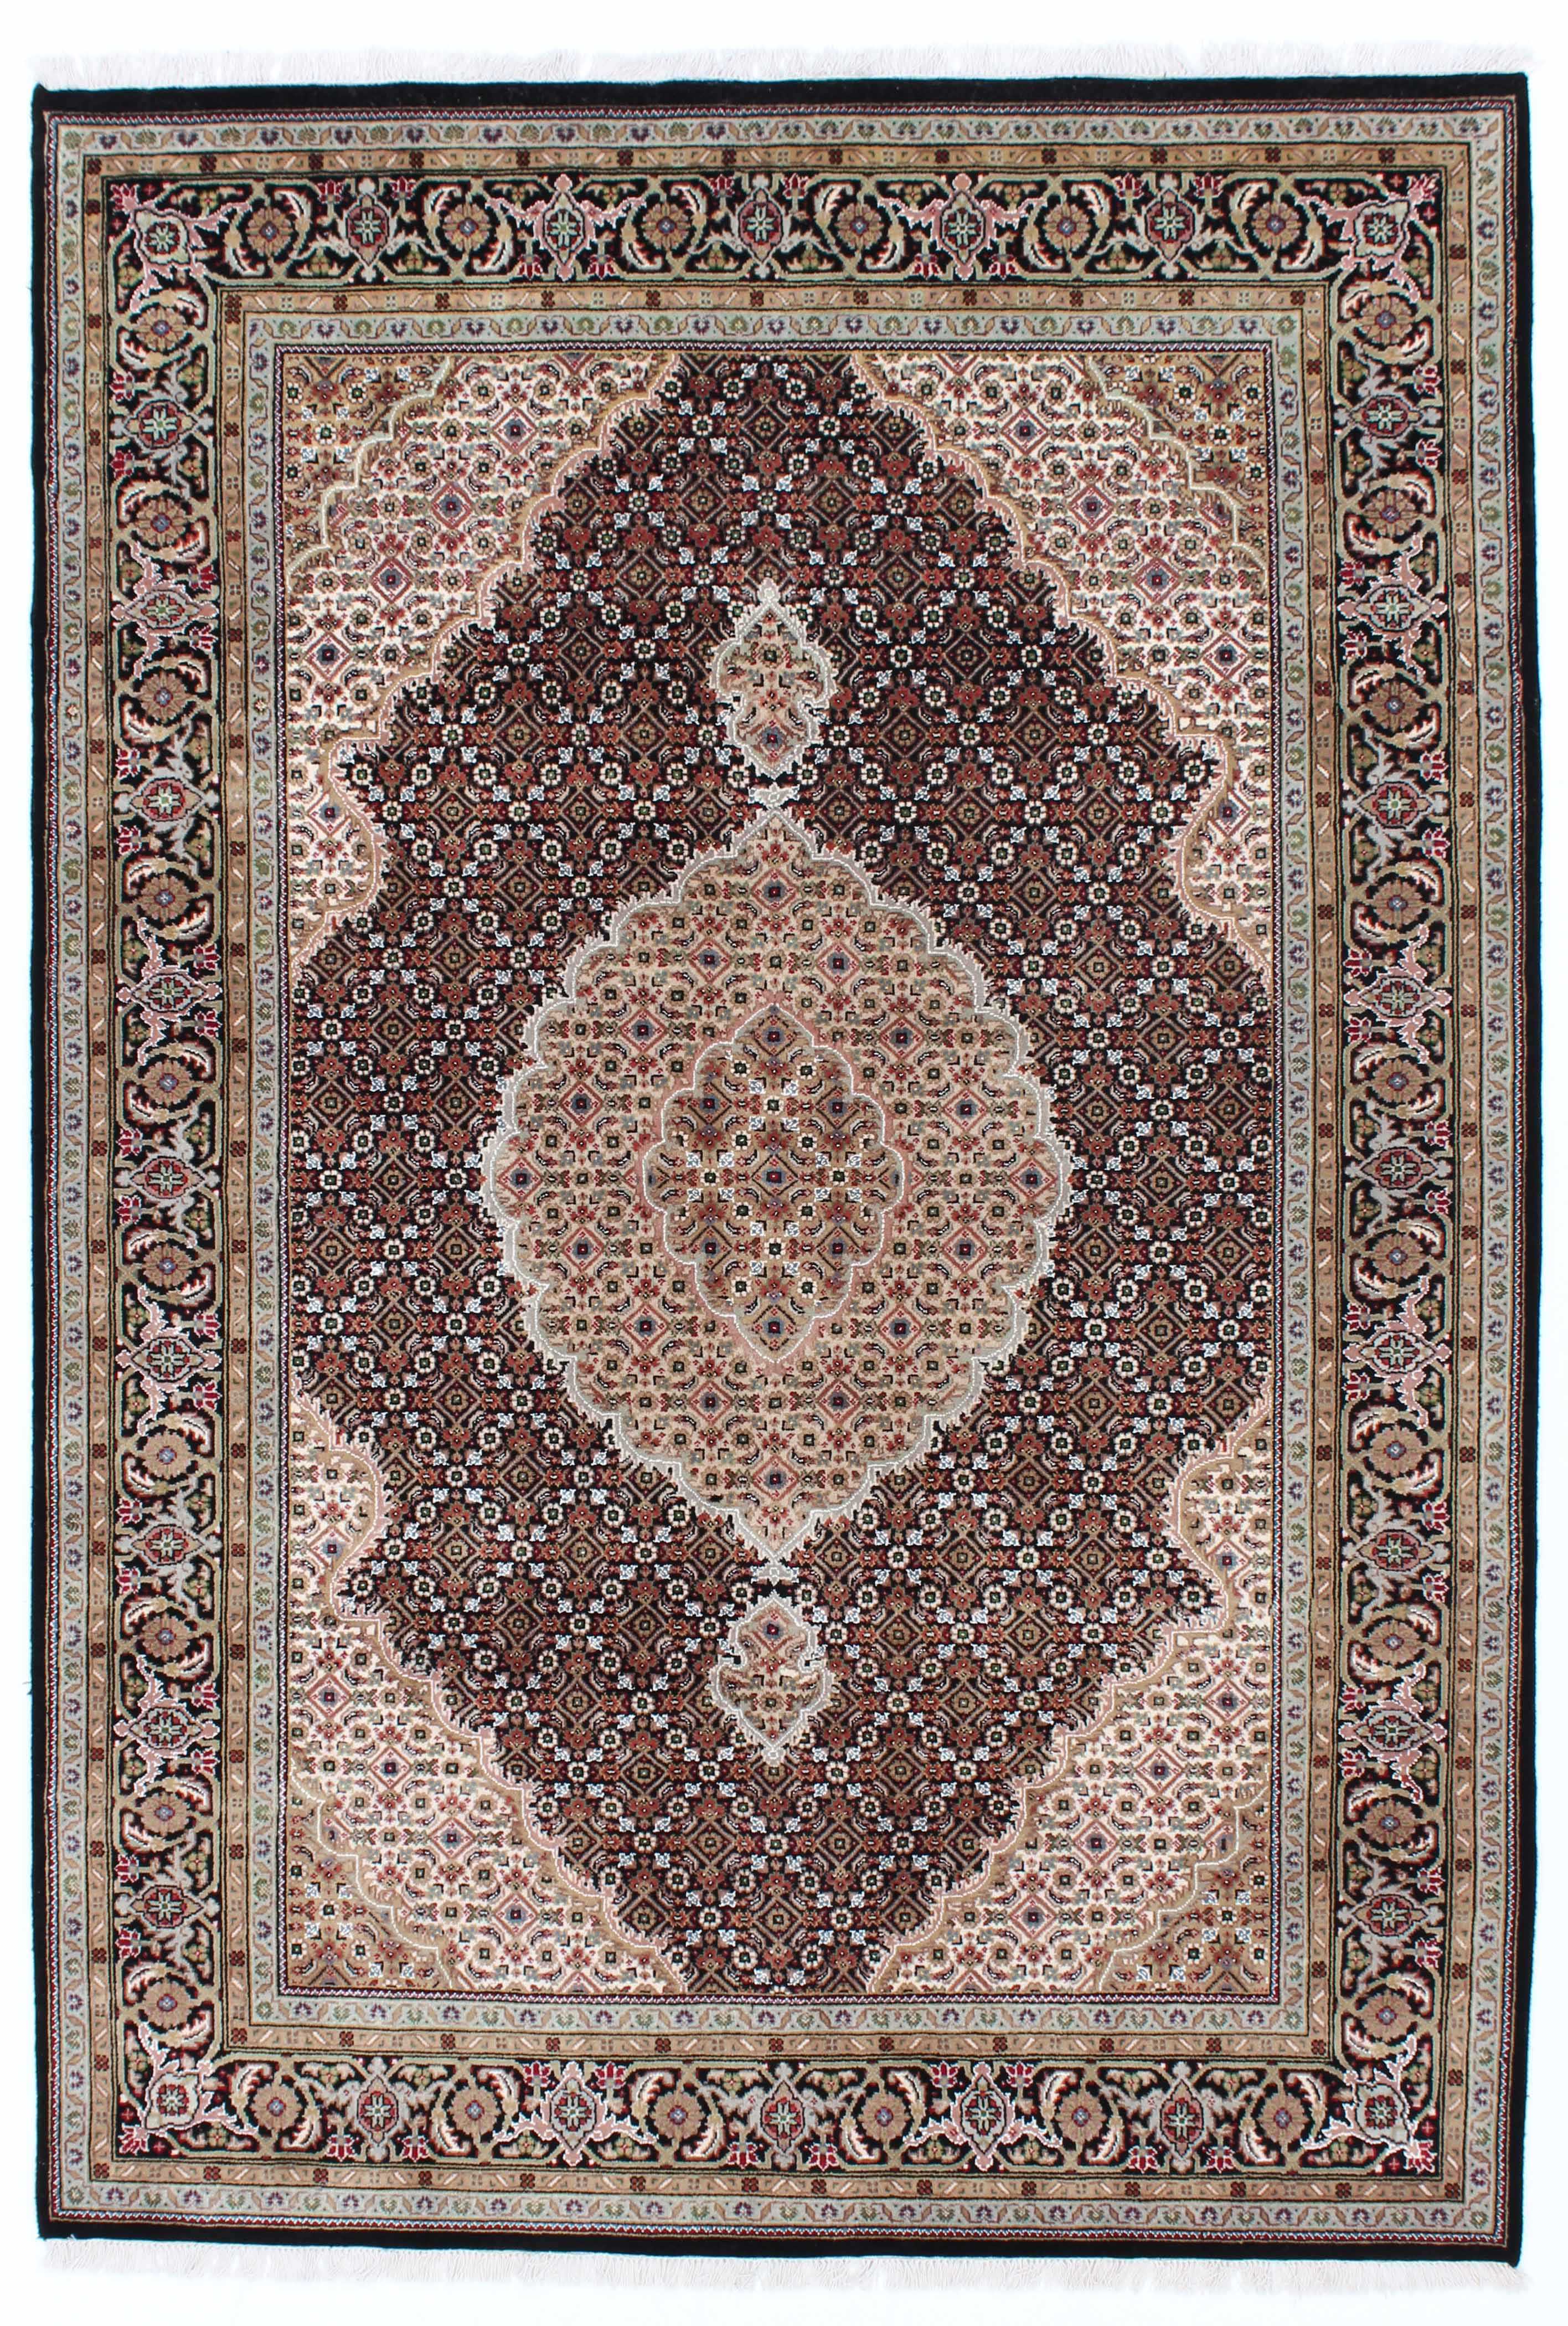 Authentic persian rug with a traditional floral design in cream and red